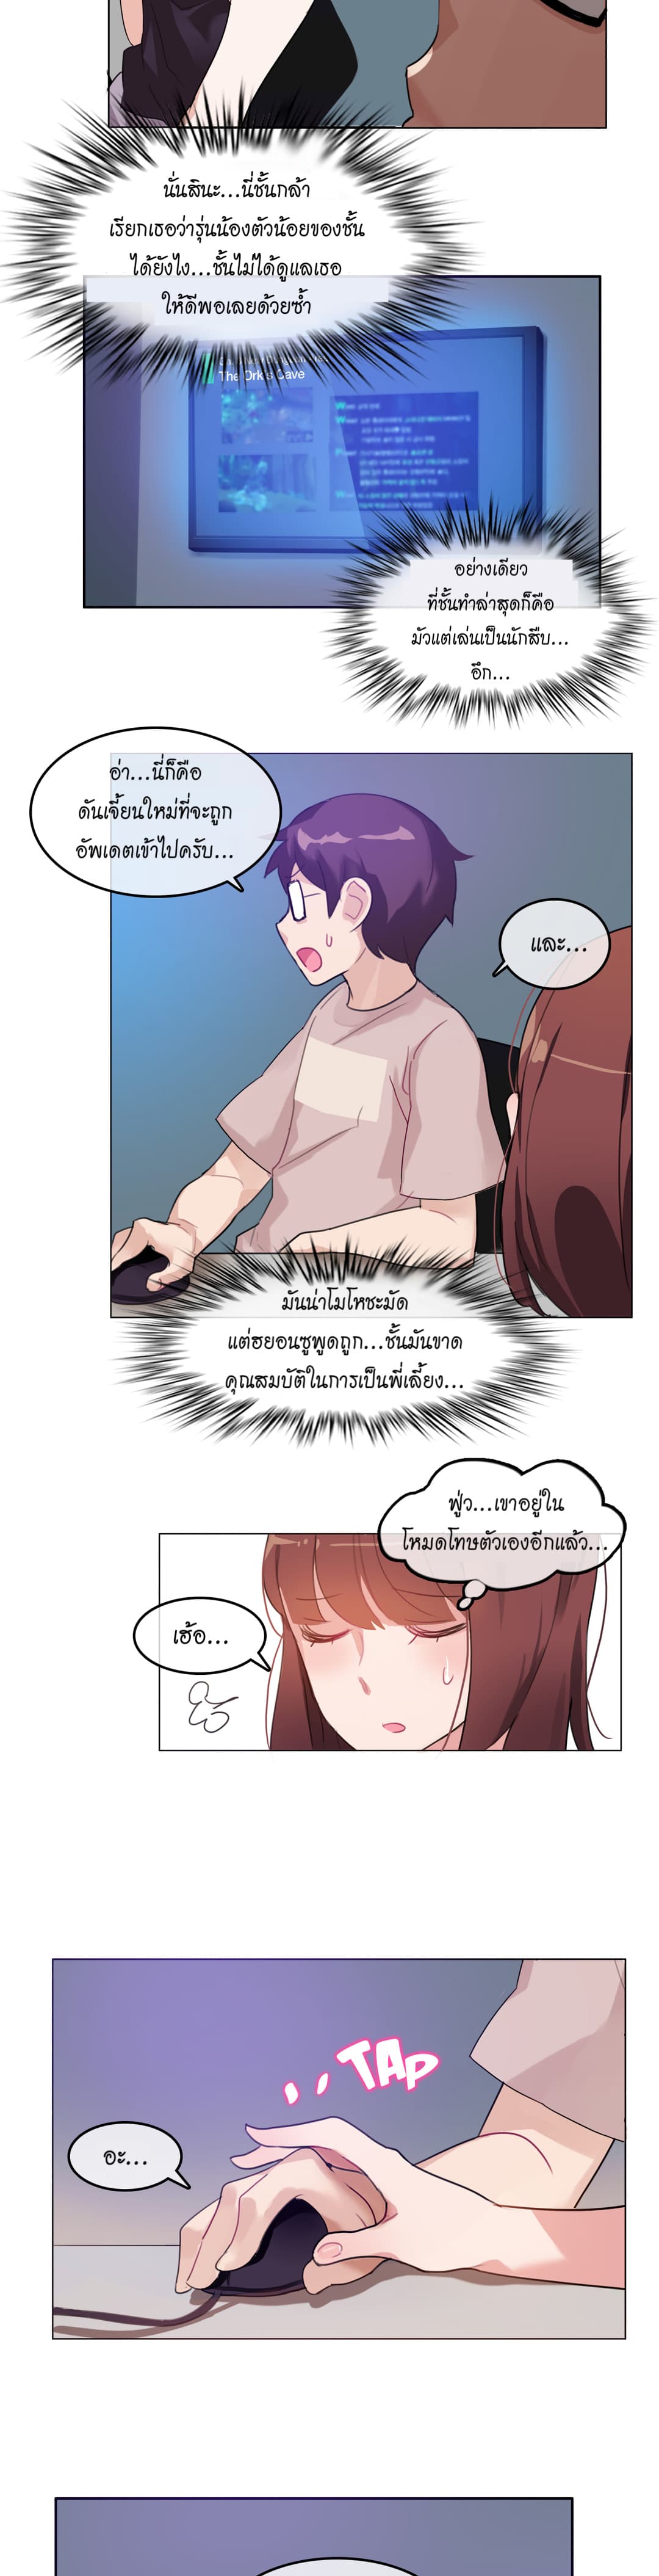 A Pervert’s Daily Life 6 (4)